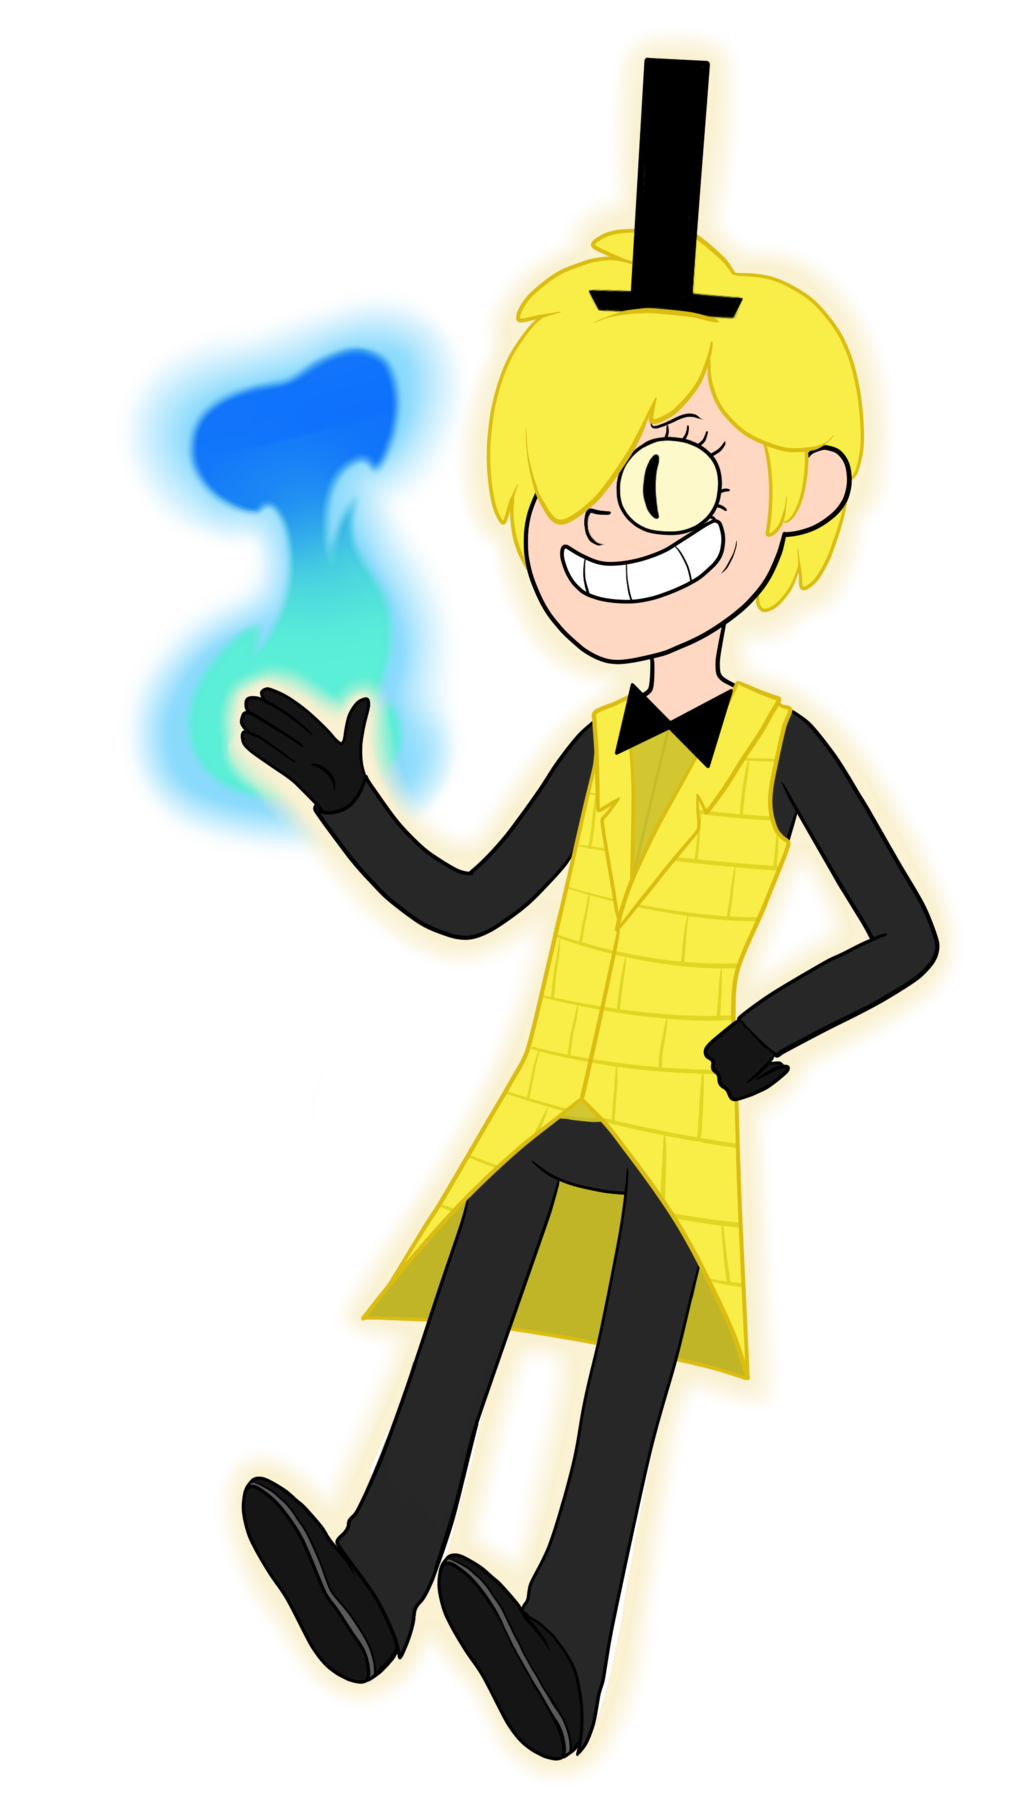 Human Bill Cipher by TheCheeseburger on